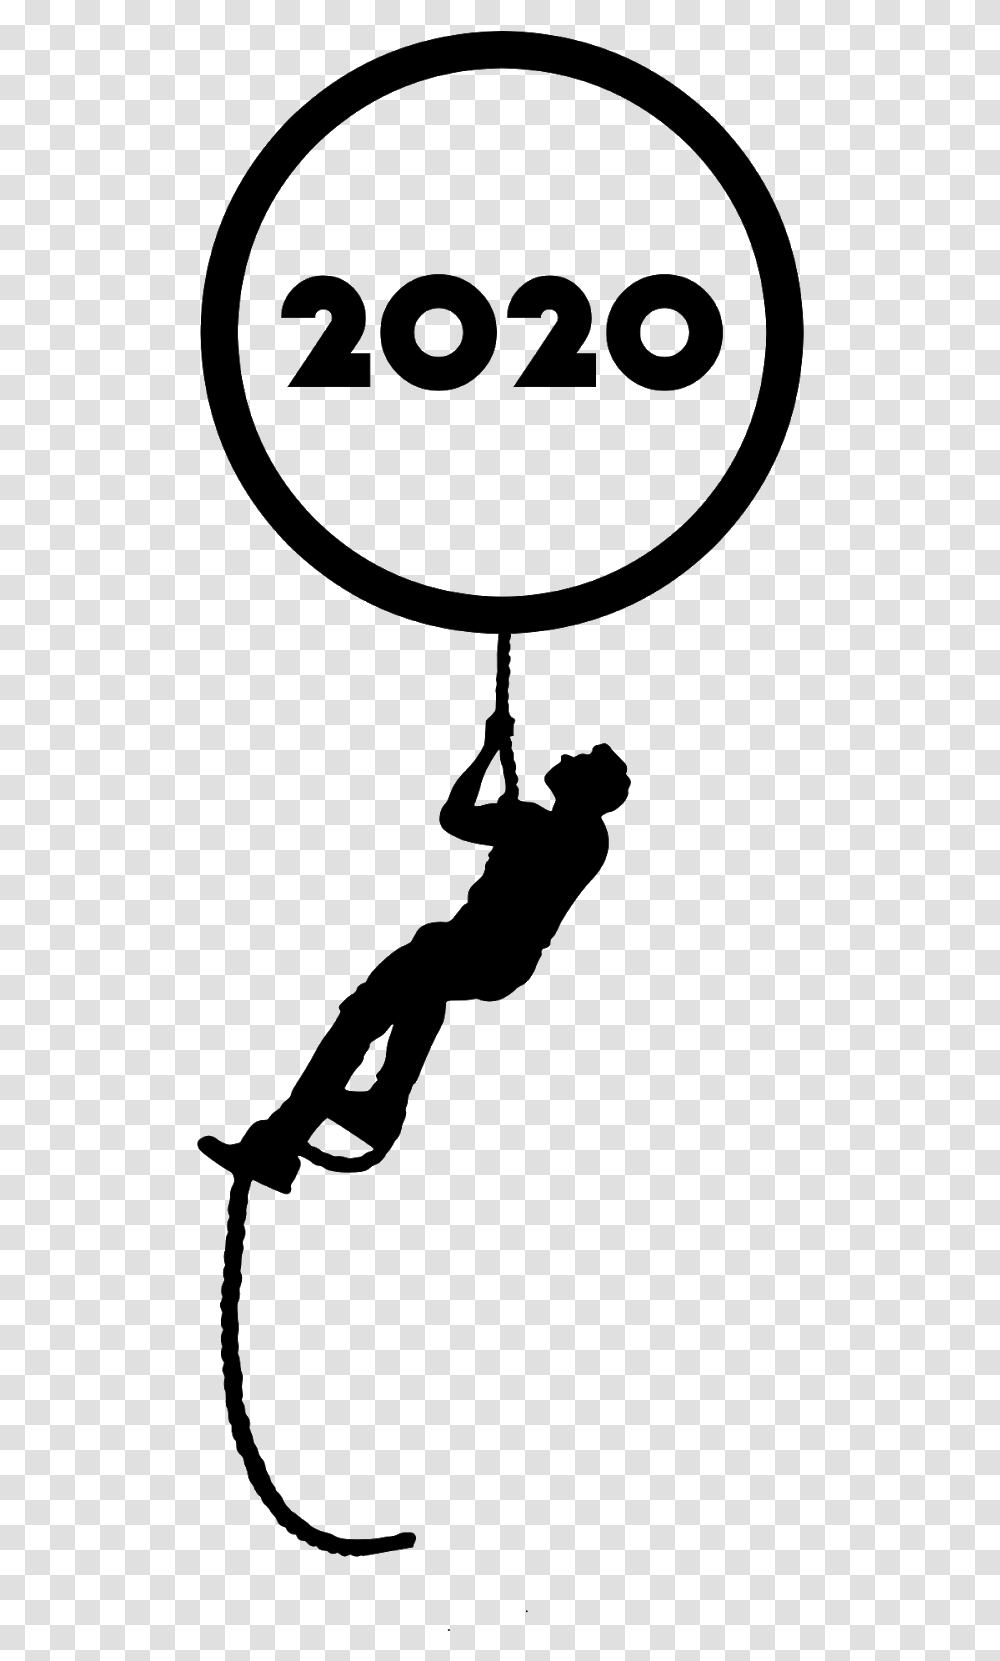 Newyear 2020 To Reach Silhouette Climbing Advertisement Happy New Year 2020 Silhouette, Gray Transparent Png